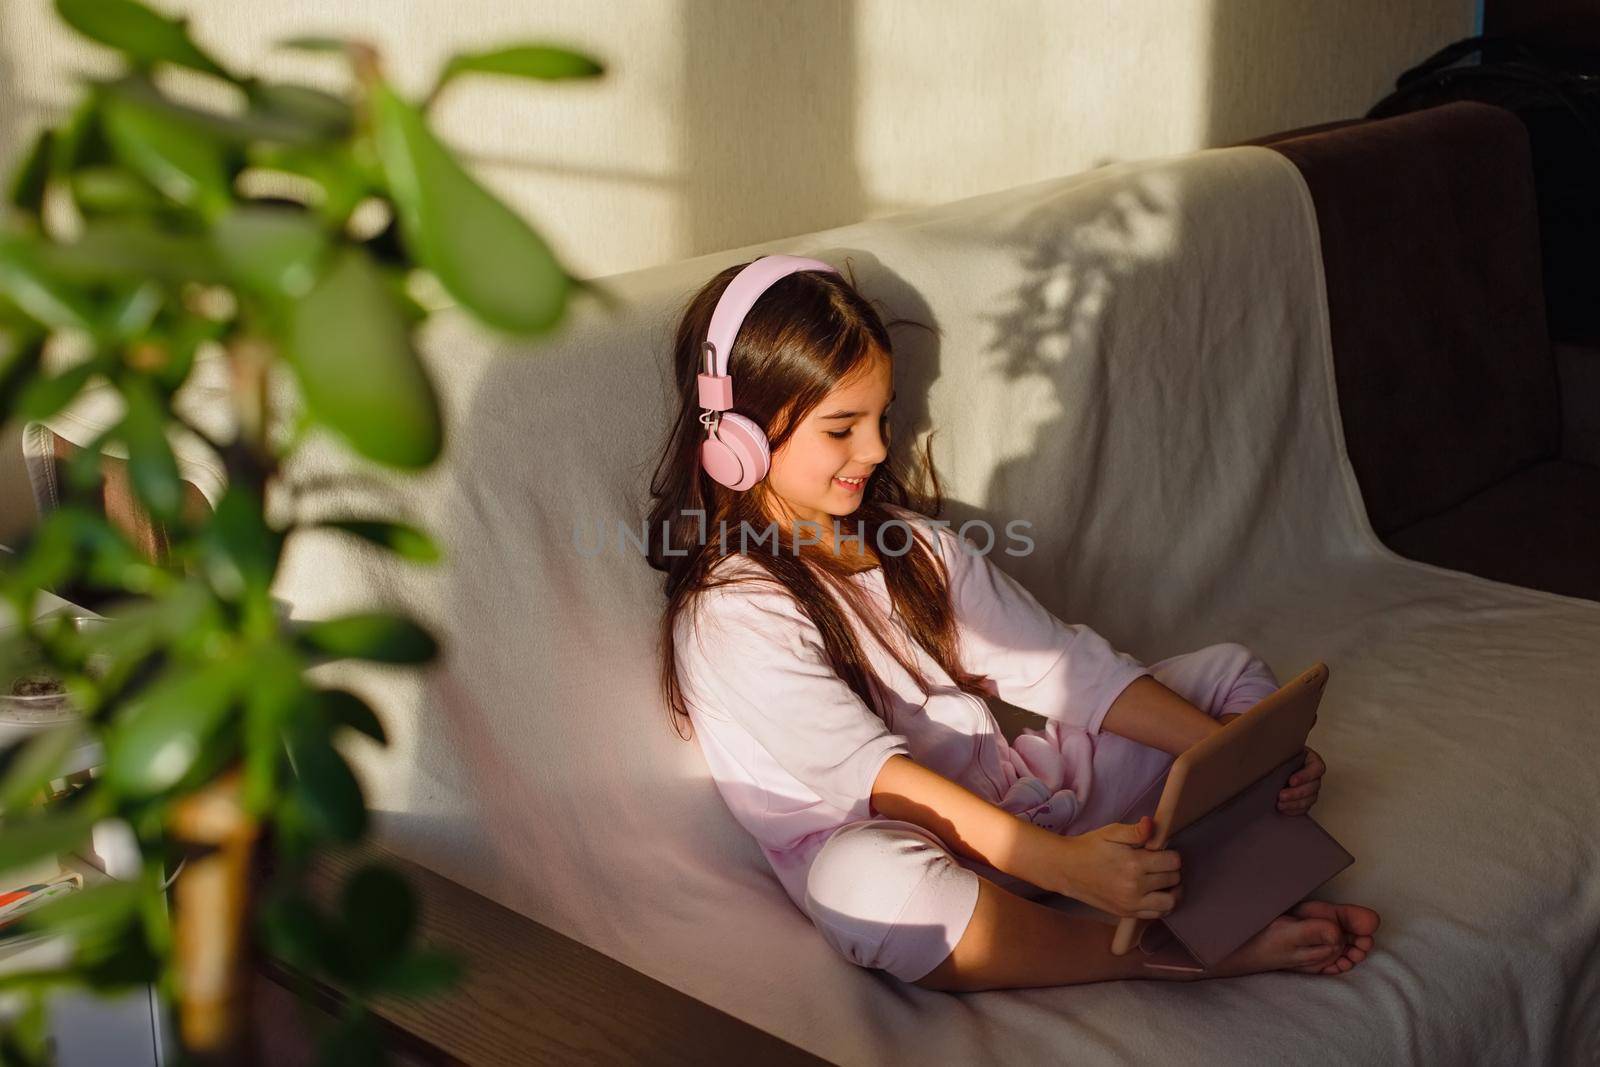 A little smiling girl in cozy pink home clothes and pink headphones sits on the couch, looks into a digital tablet.